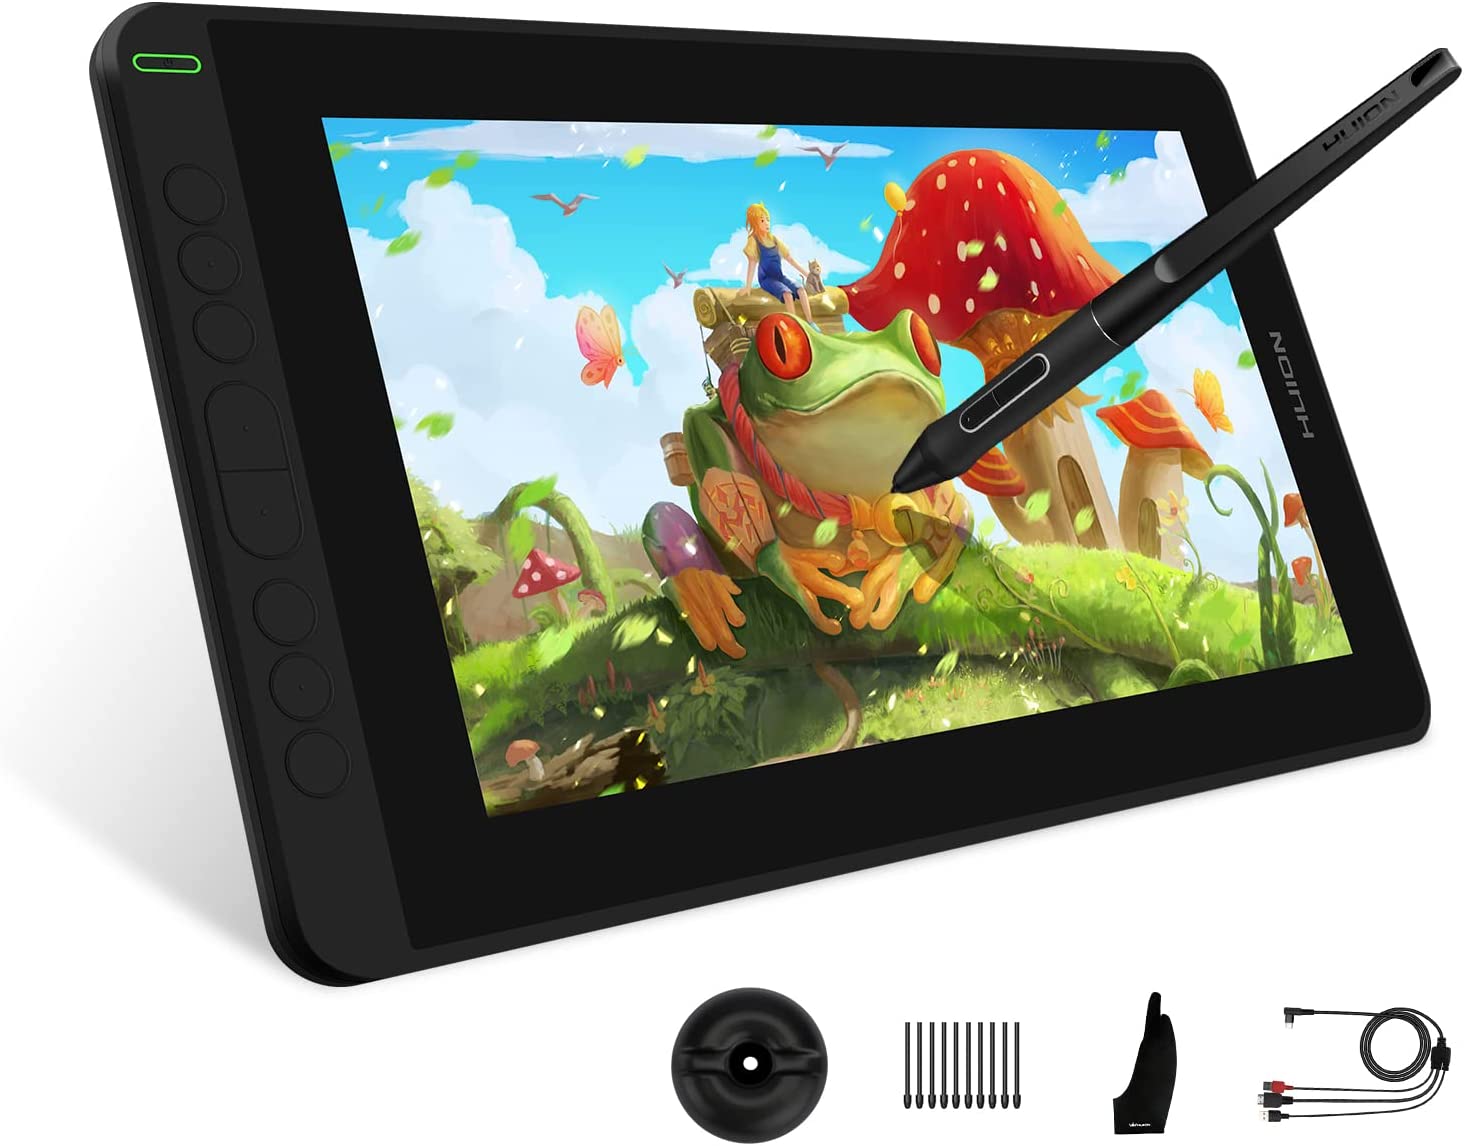 HUION KAMVAS 12 Drawing Tablet with Full-Laminated [...]